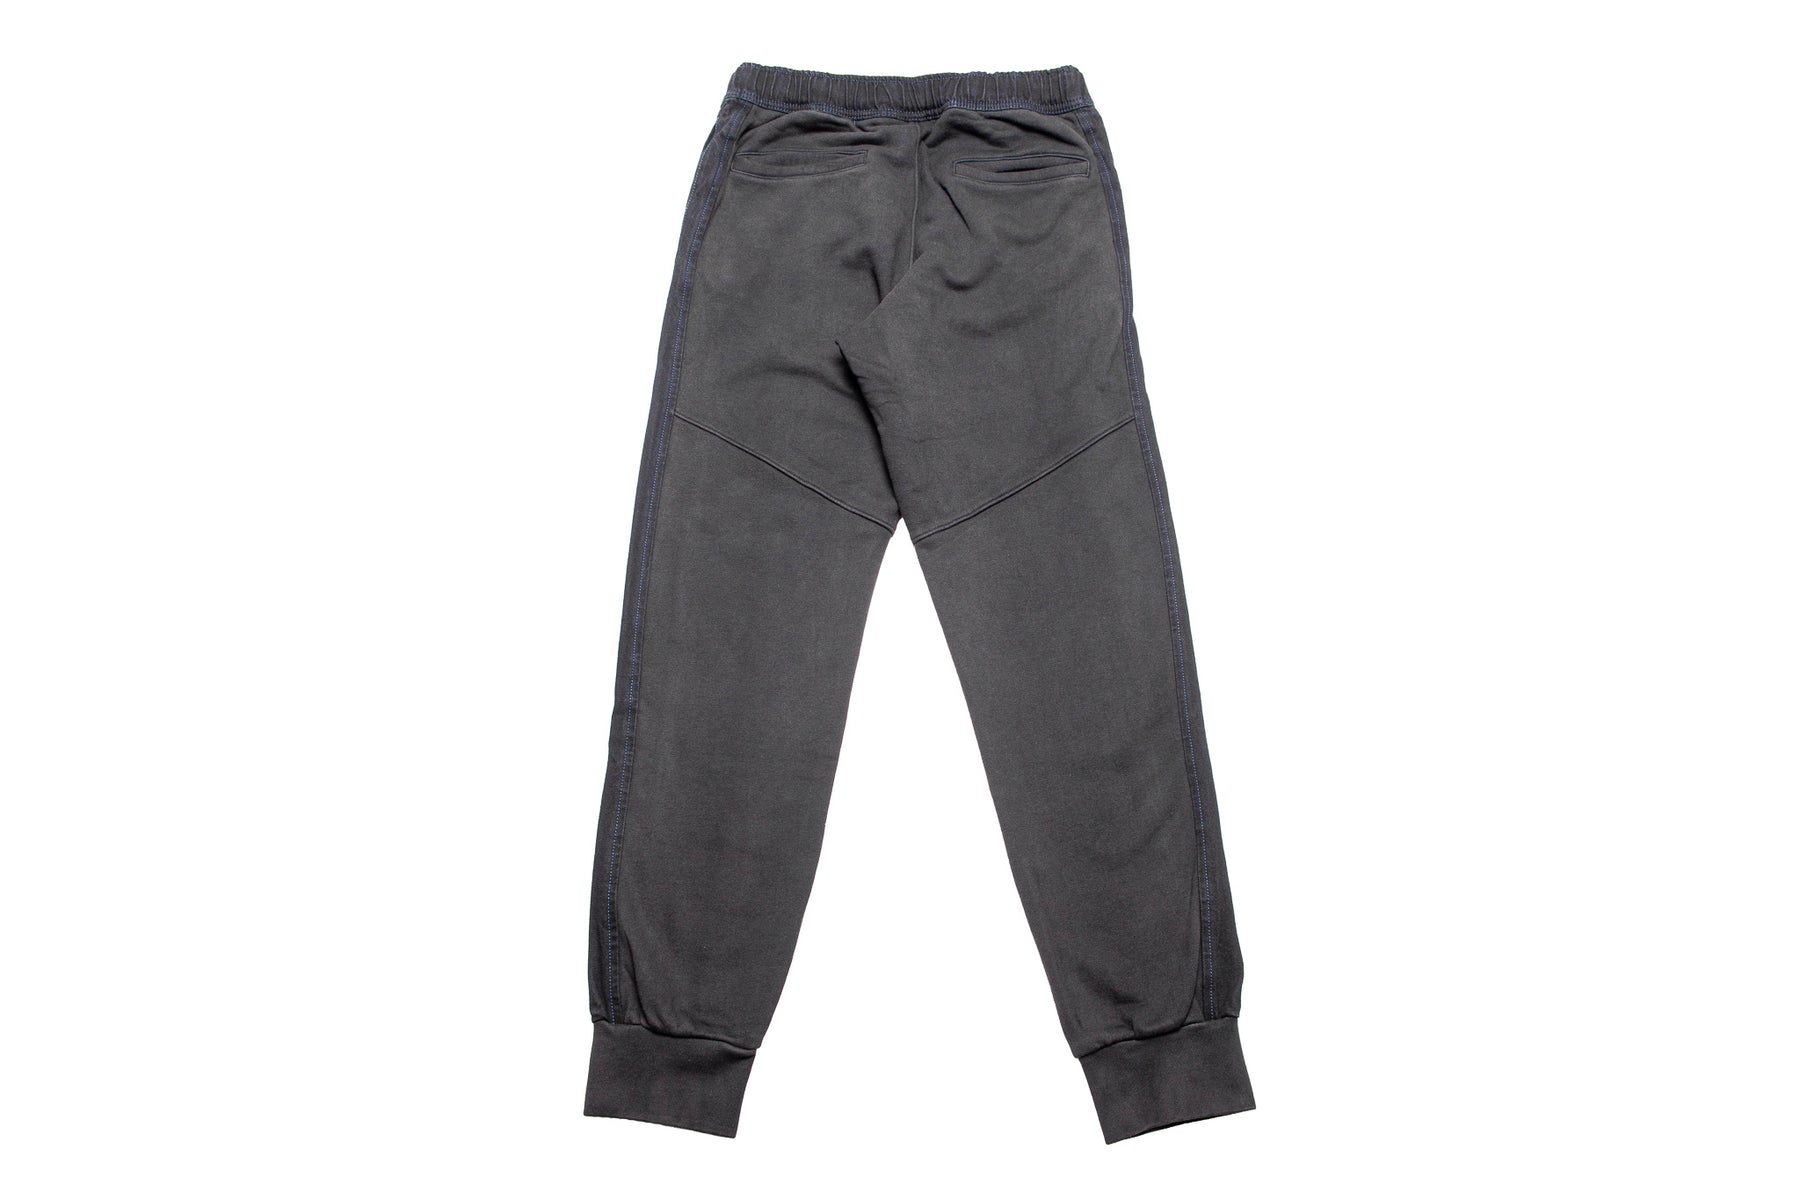 AlphaStyle Sequoia Washed Sweatpants "Black"